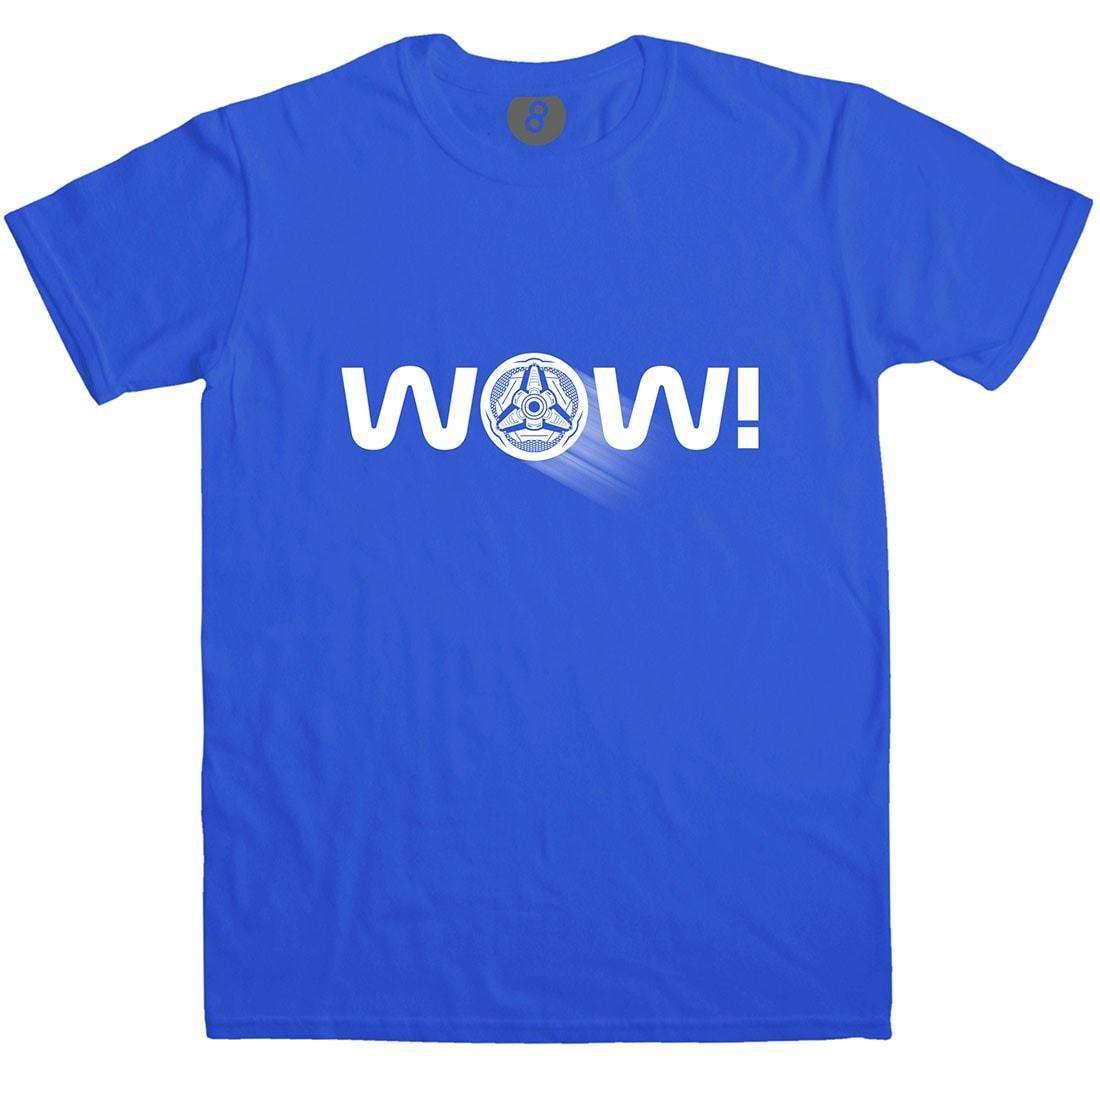 Wow! Graphic T-Shirt For Men 8Ball